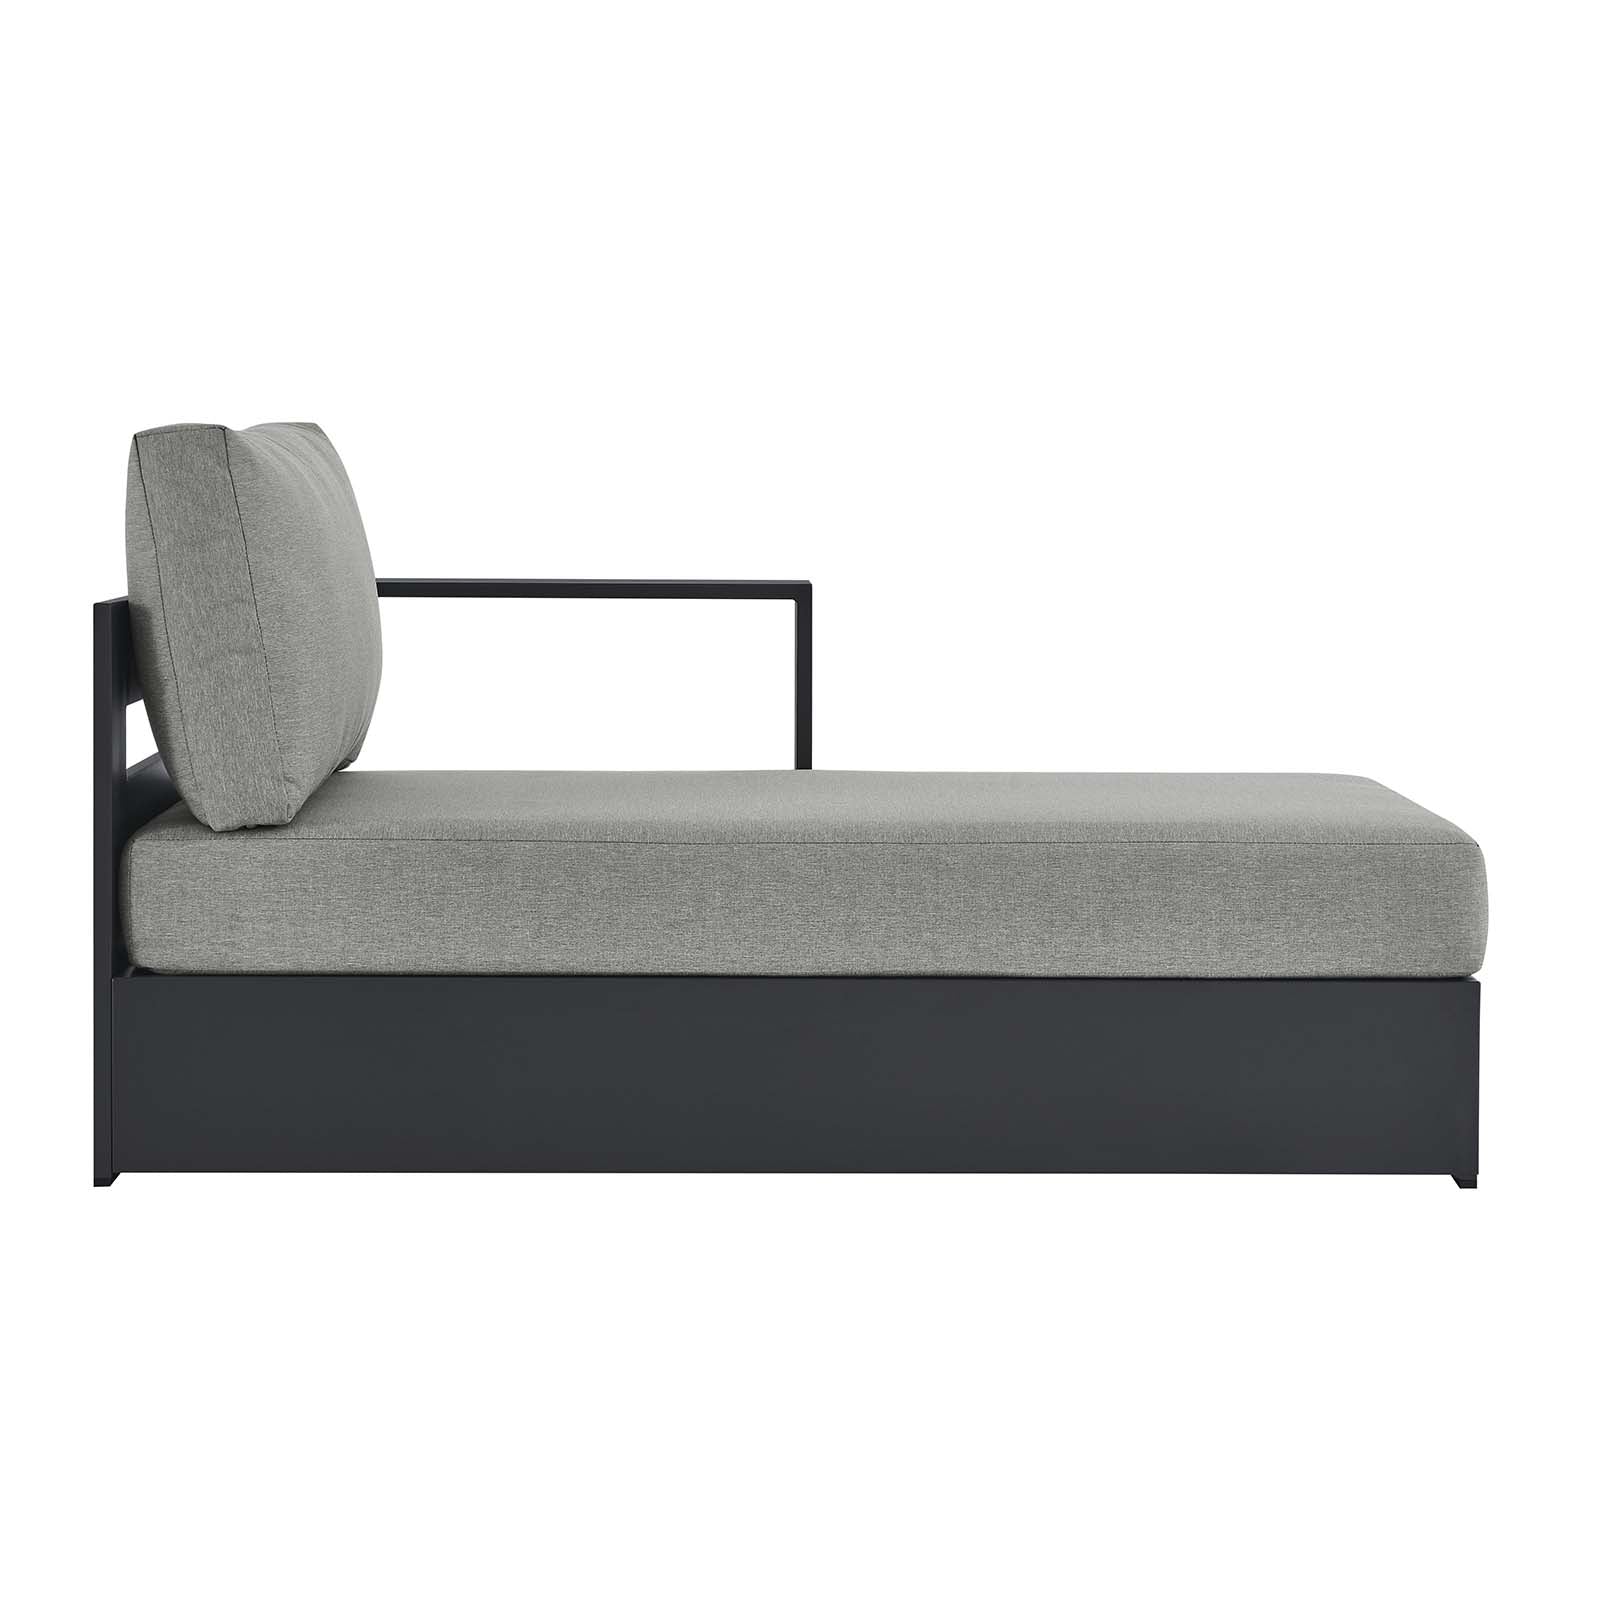 Tahoe Outdoor Patio Powder-Coated Aluminum Modular Right-Facing Chaise Lounge - East Shore Modern Home Furnishings